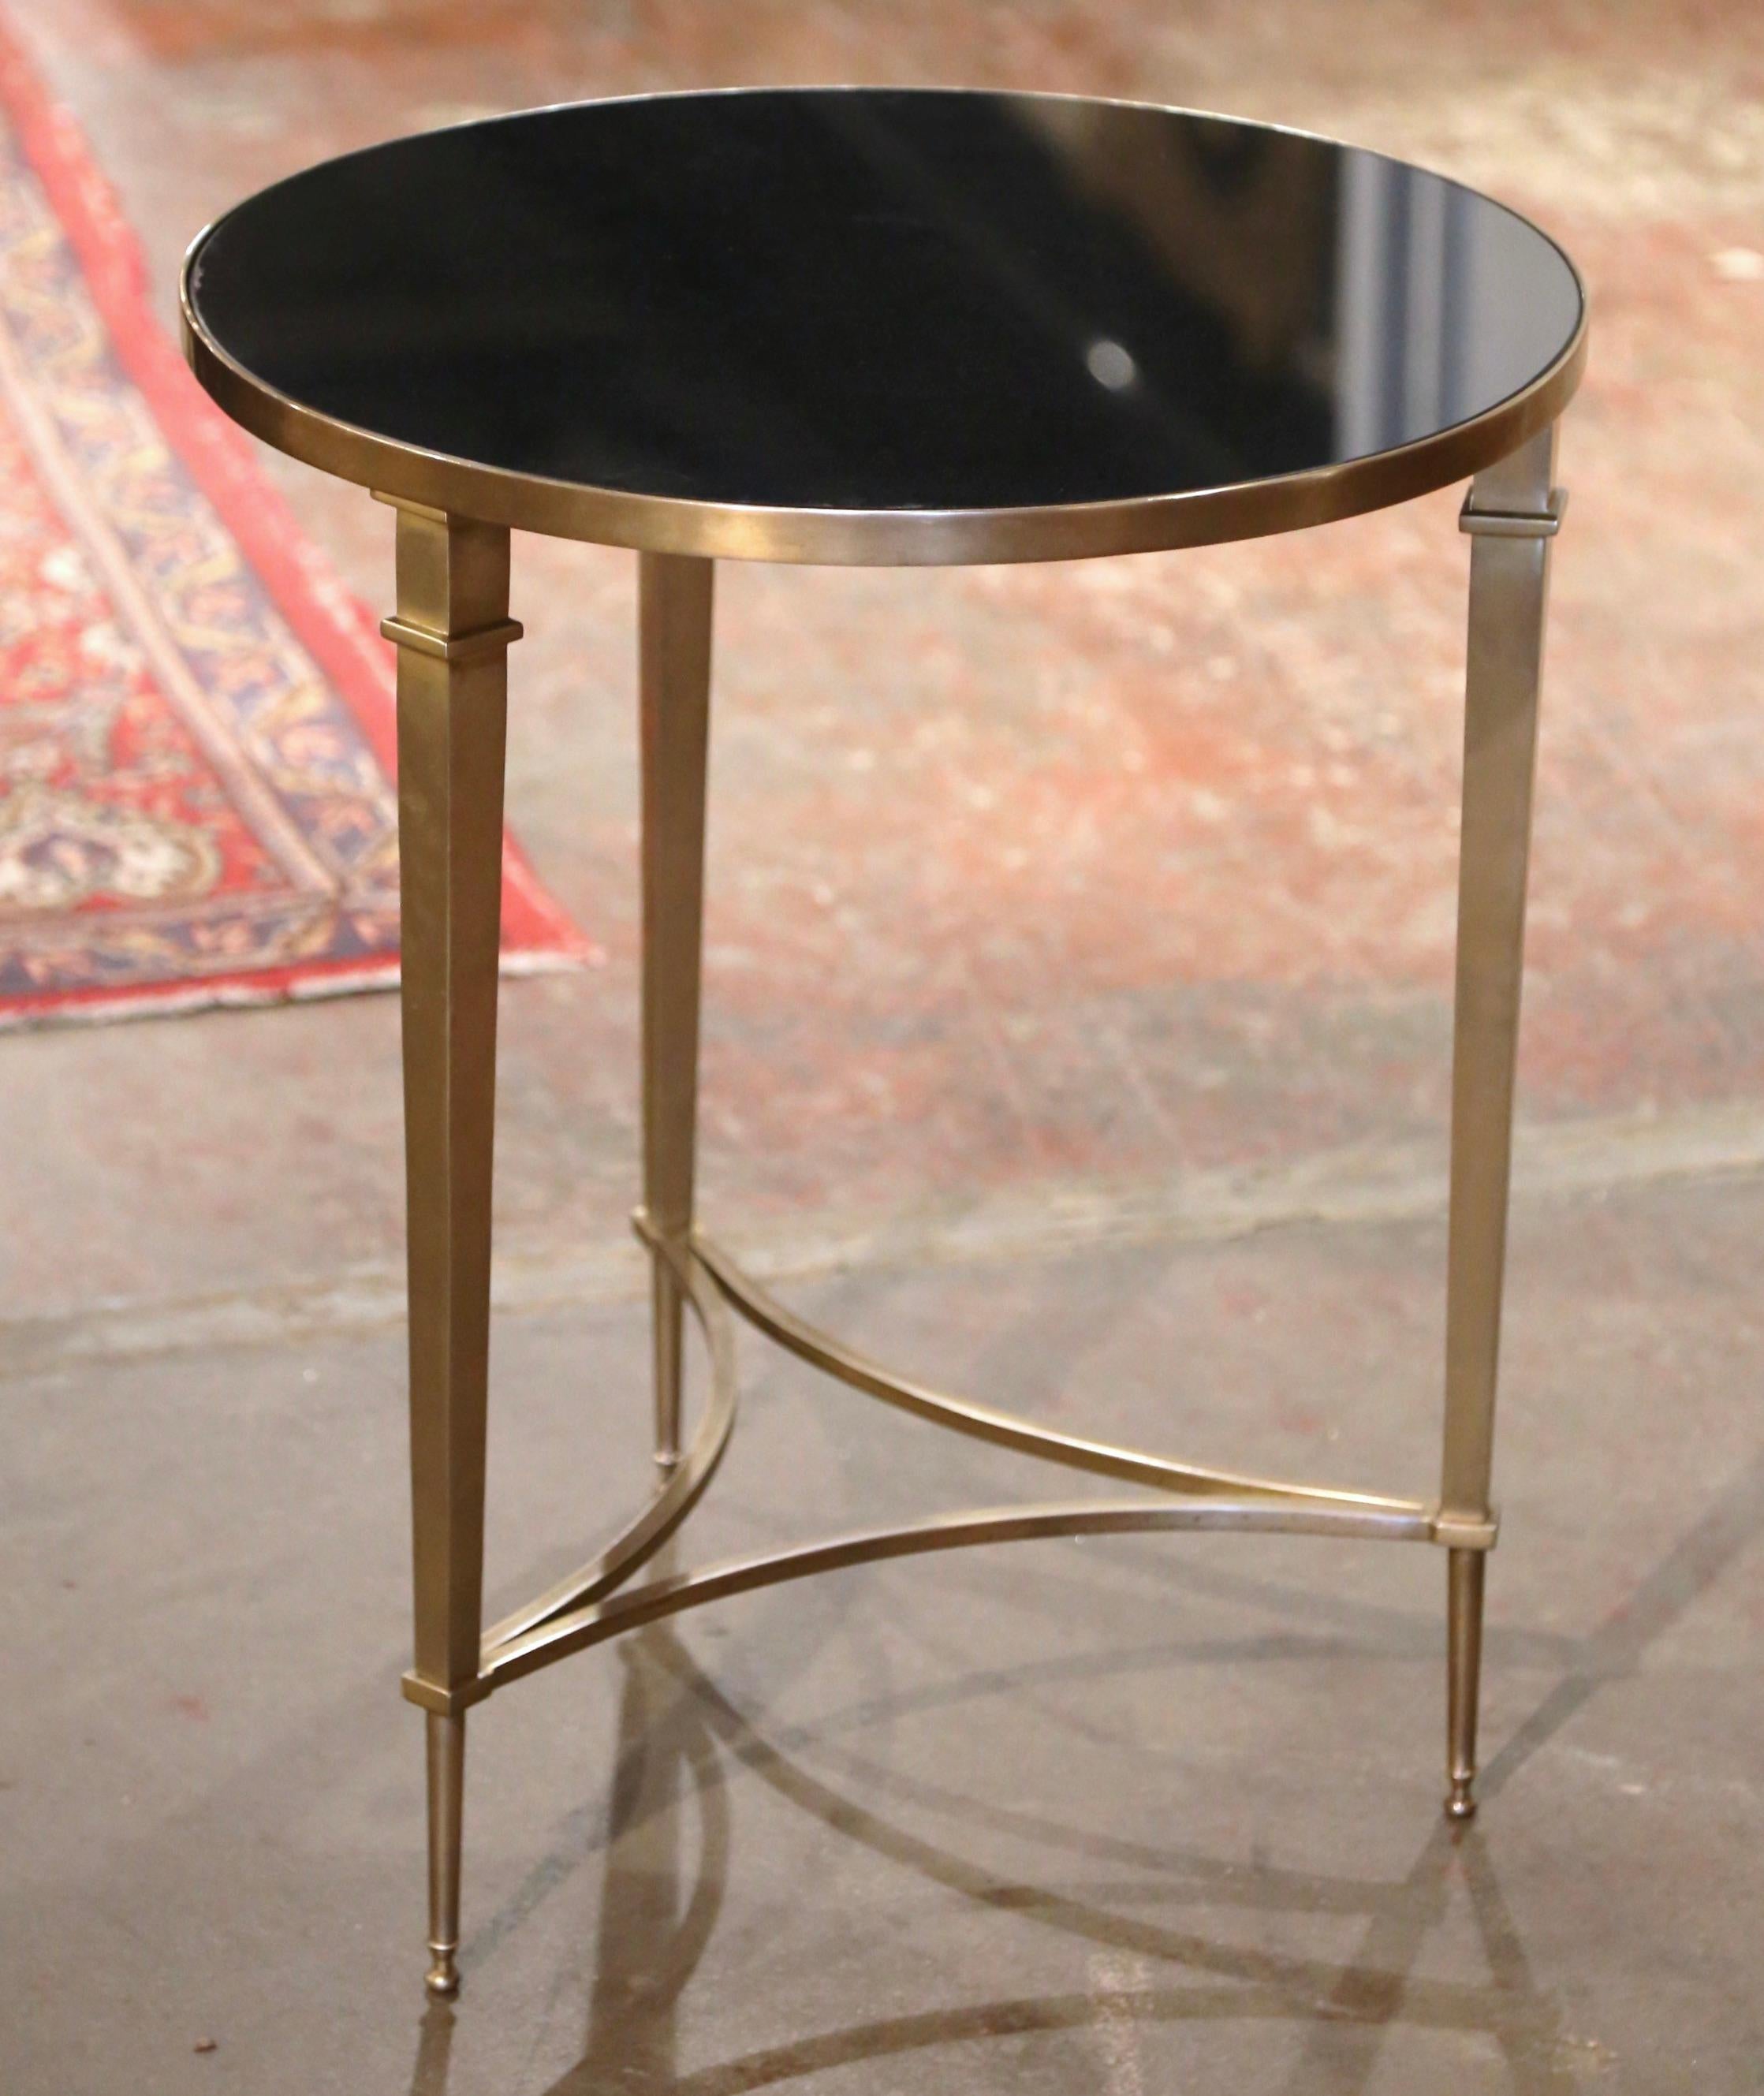 Decorate a living room with this elegant neoclassical antique gueridon table. Created in France circa 1950, and round in shape, the table is supported by three slender tapered legs ending with small cap feet. The bottom is further embellished with a